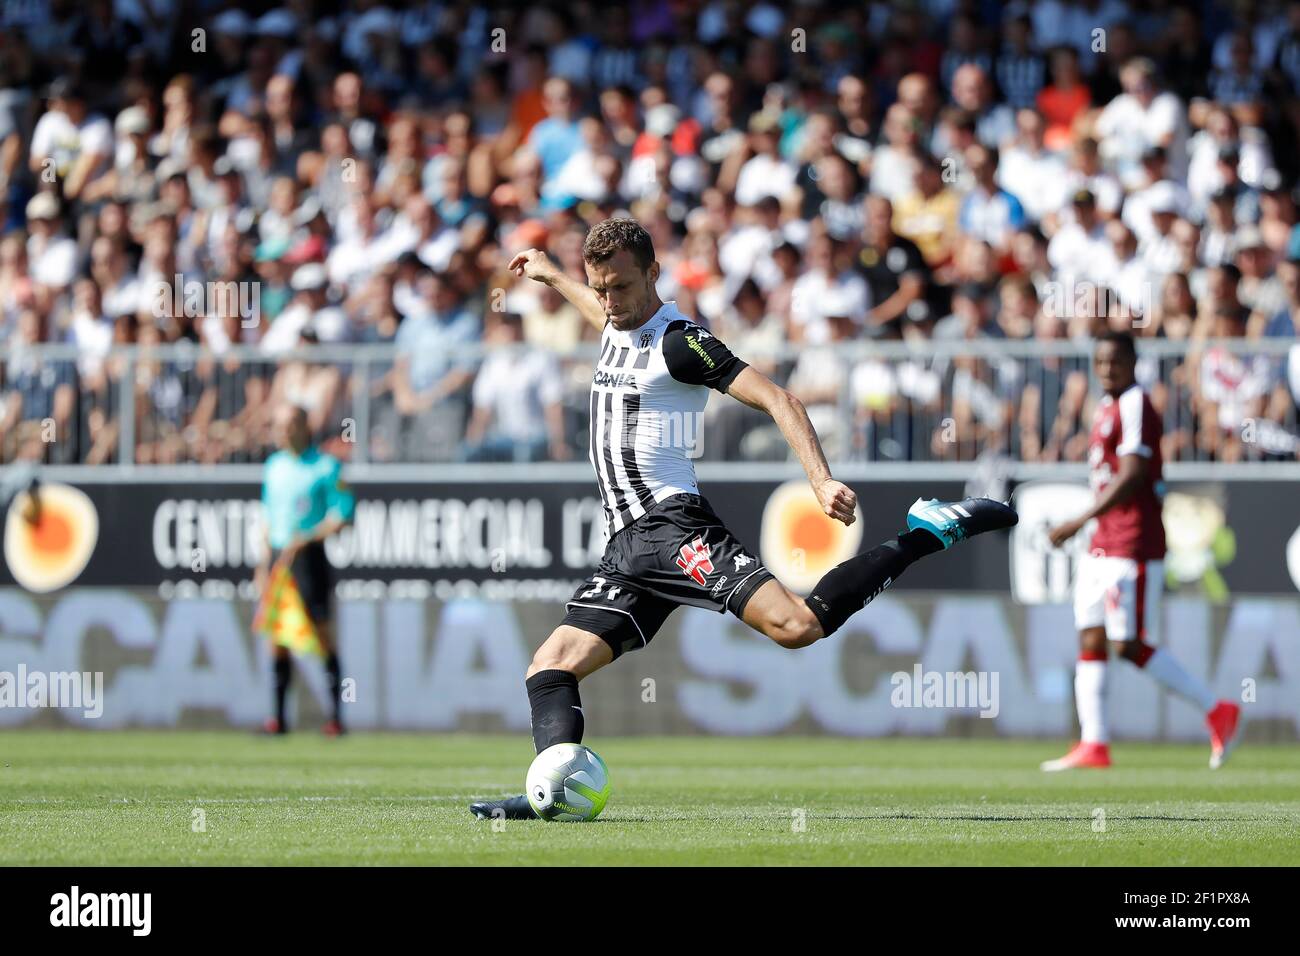 Romain THOMAS (SCO Angers) during the French championship L1 football match between SCO Angers and Bordeaux on August 6th, 2017 at Raymond-Kopa stadium, France - PHOTO Stéphane Allaman / DPPI Stock Photo